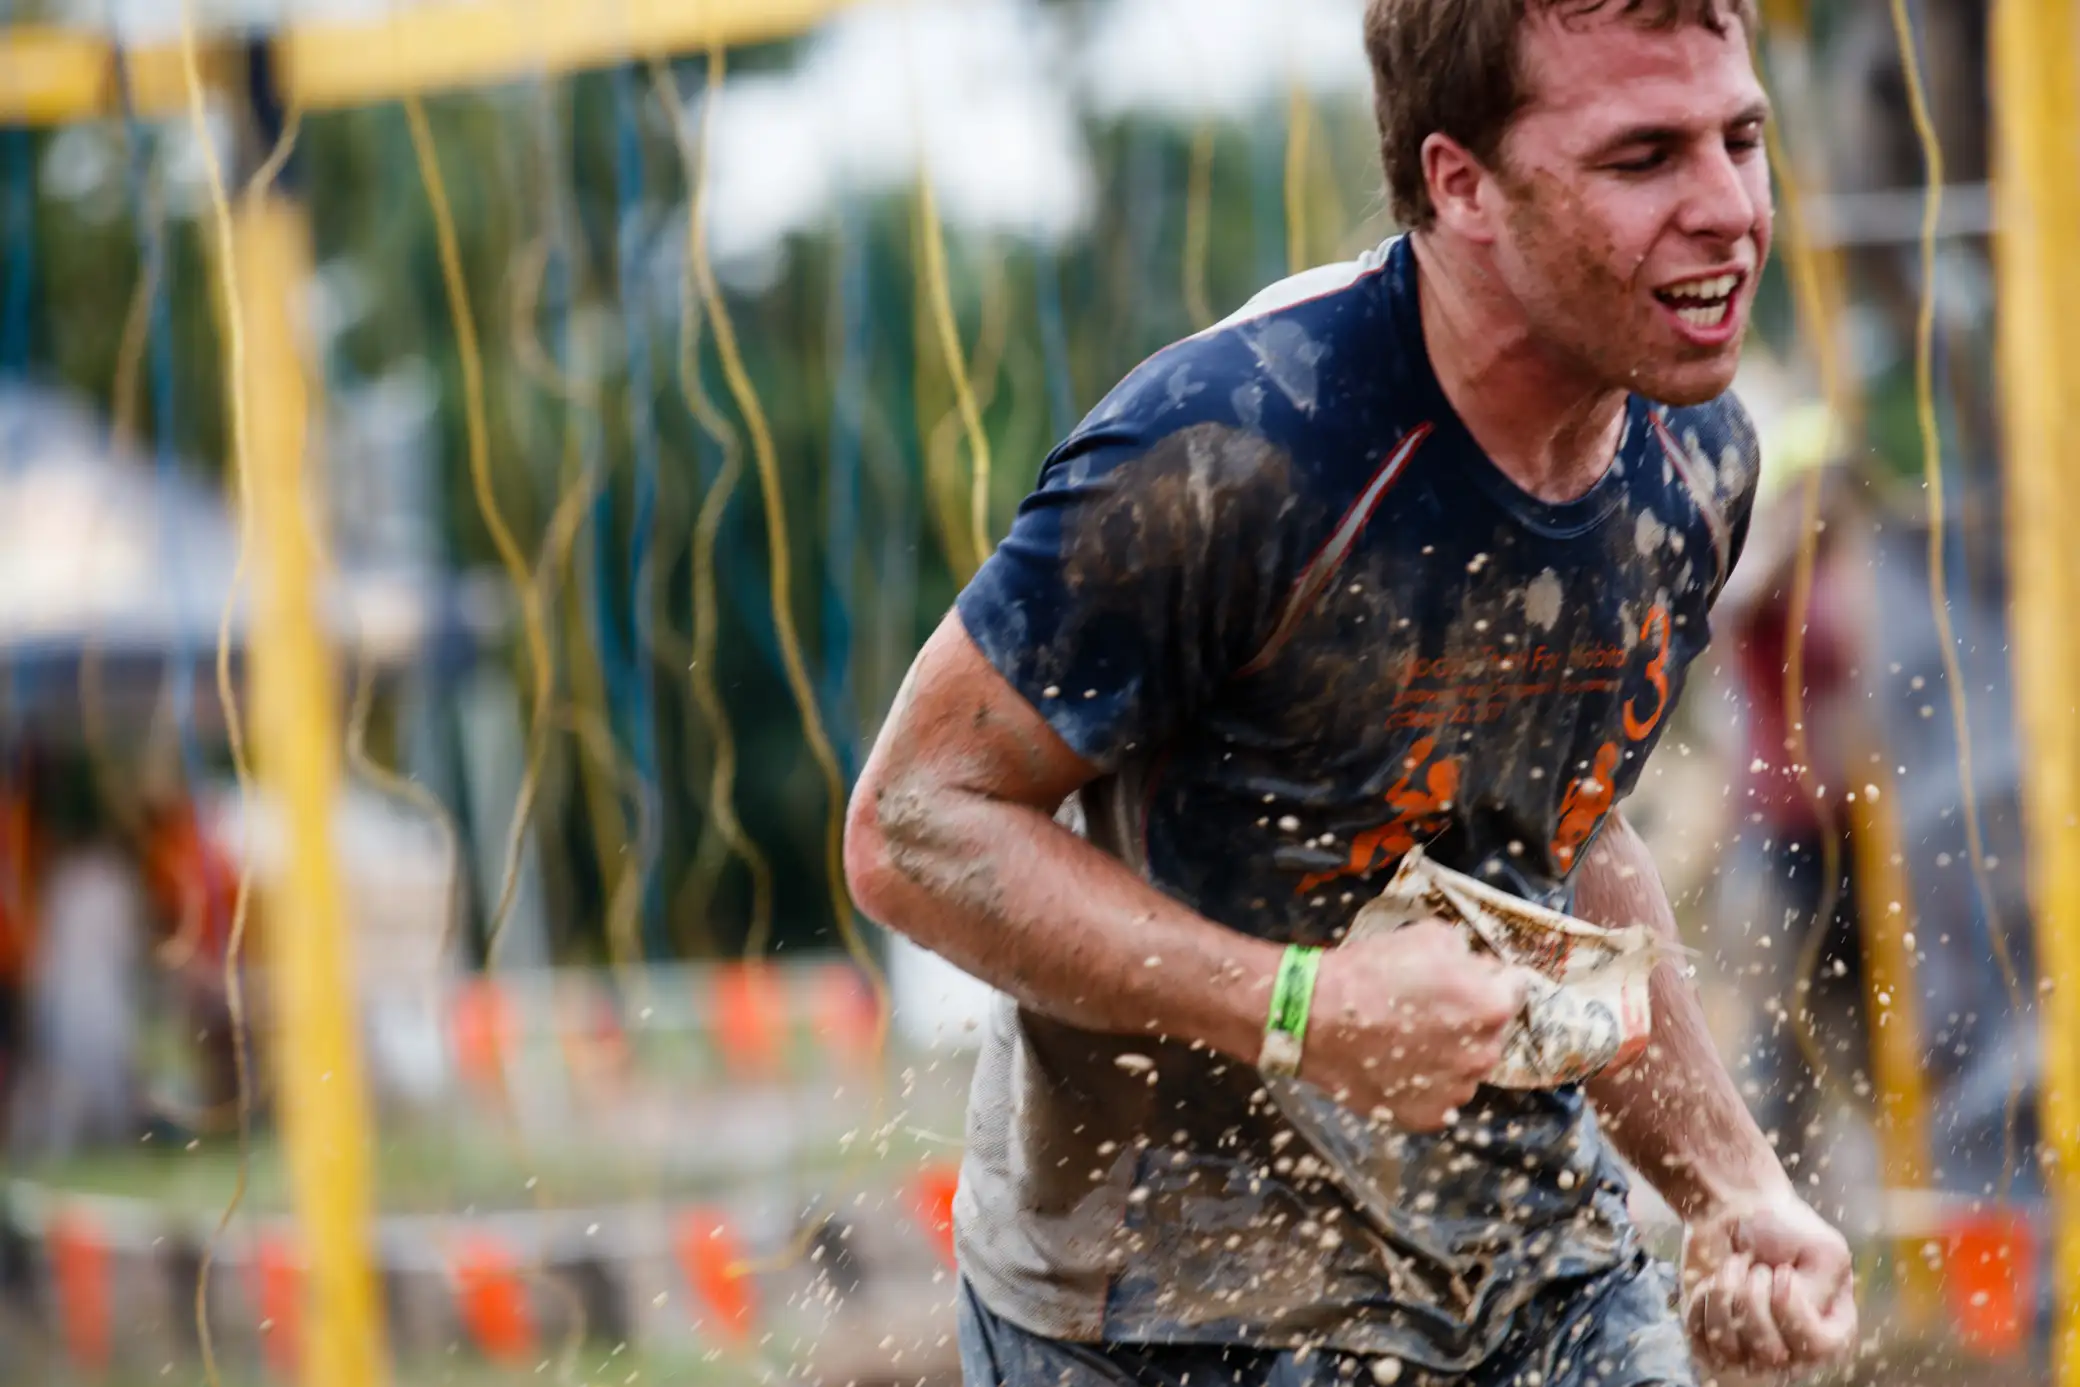 Photo from a Tough Mudder event